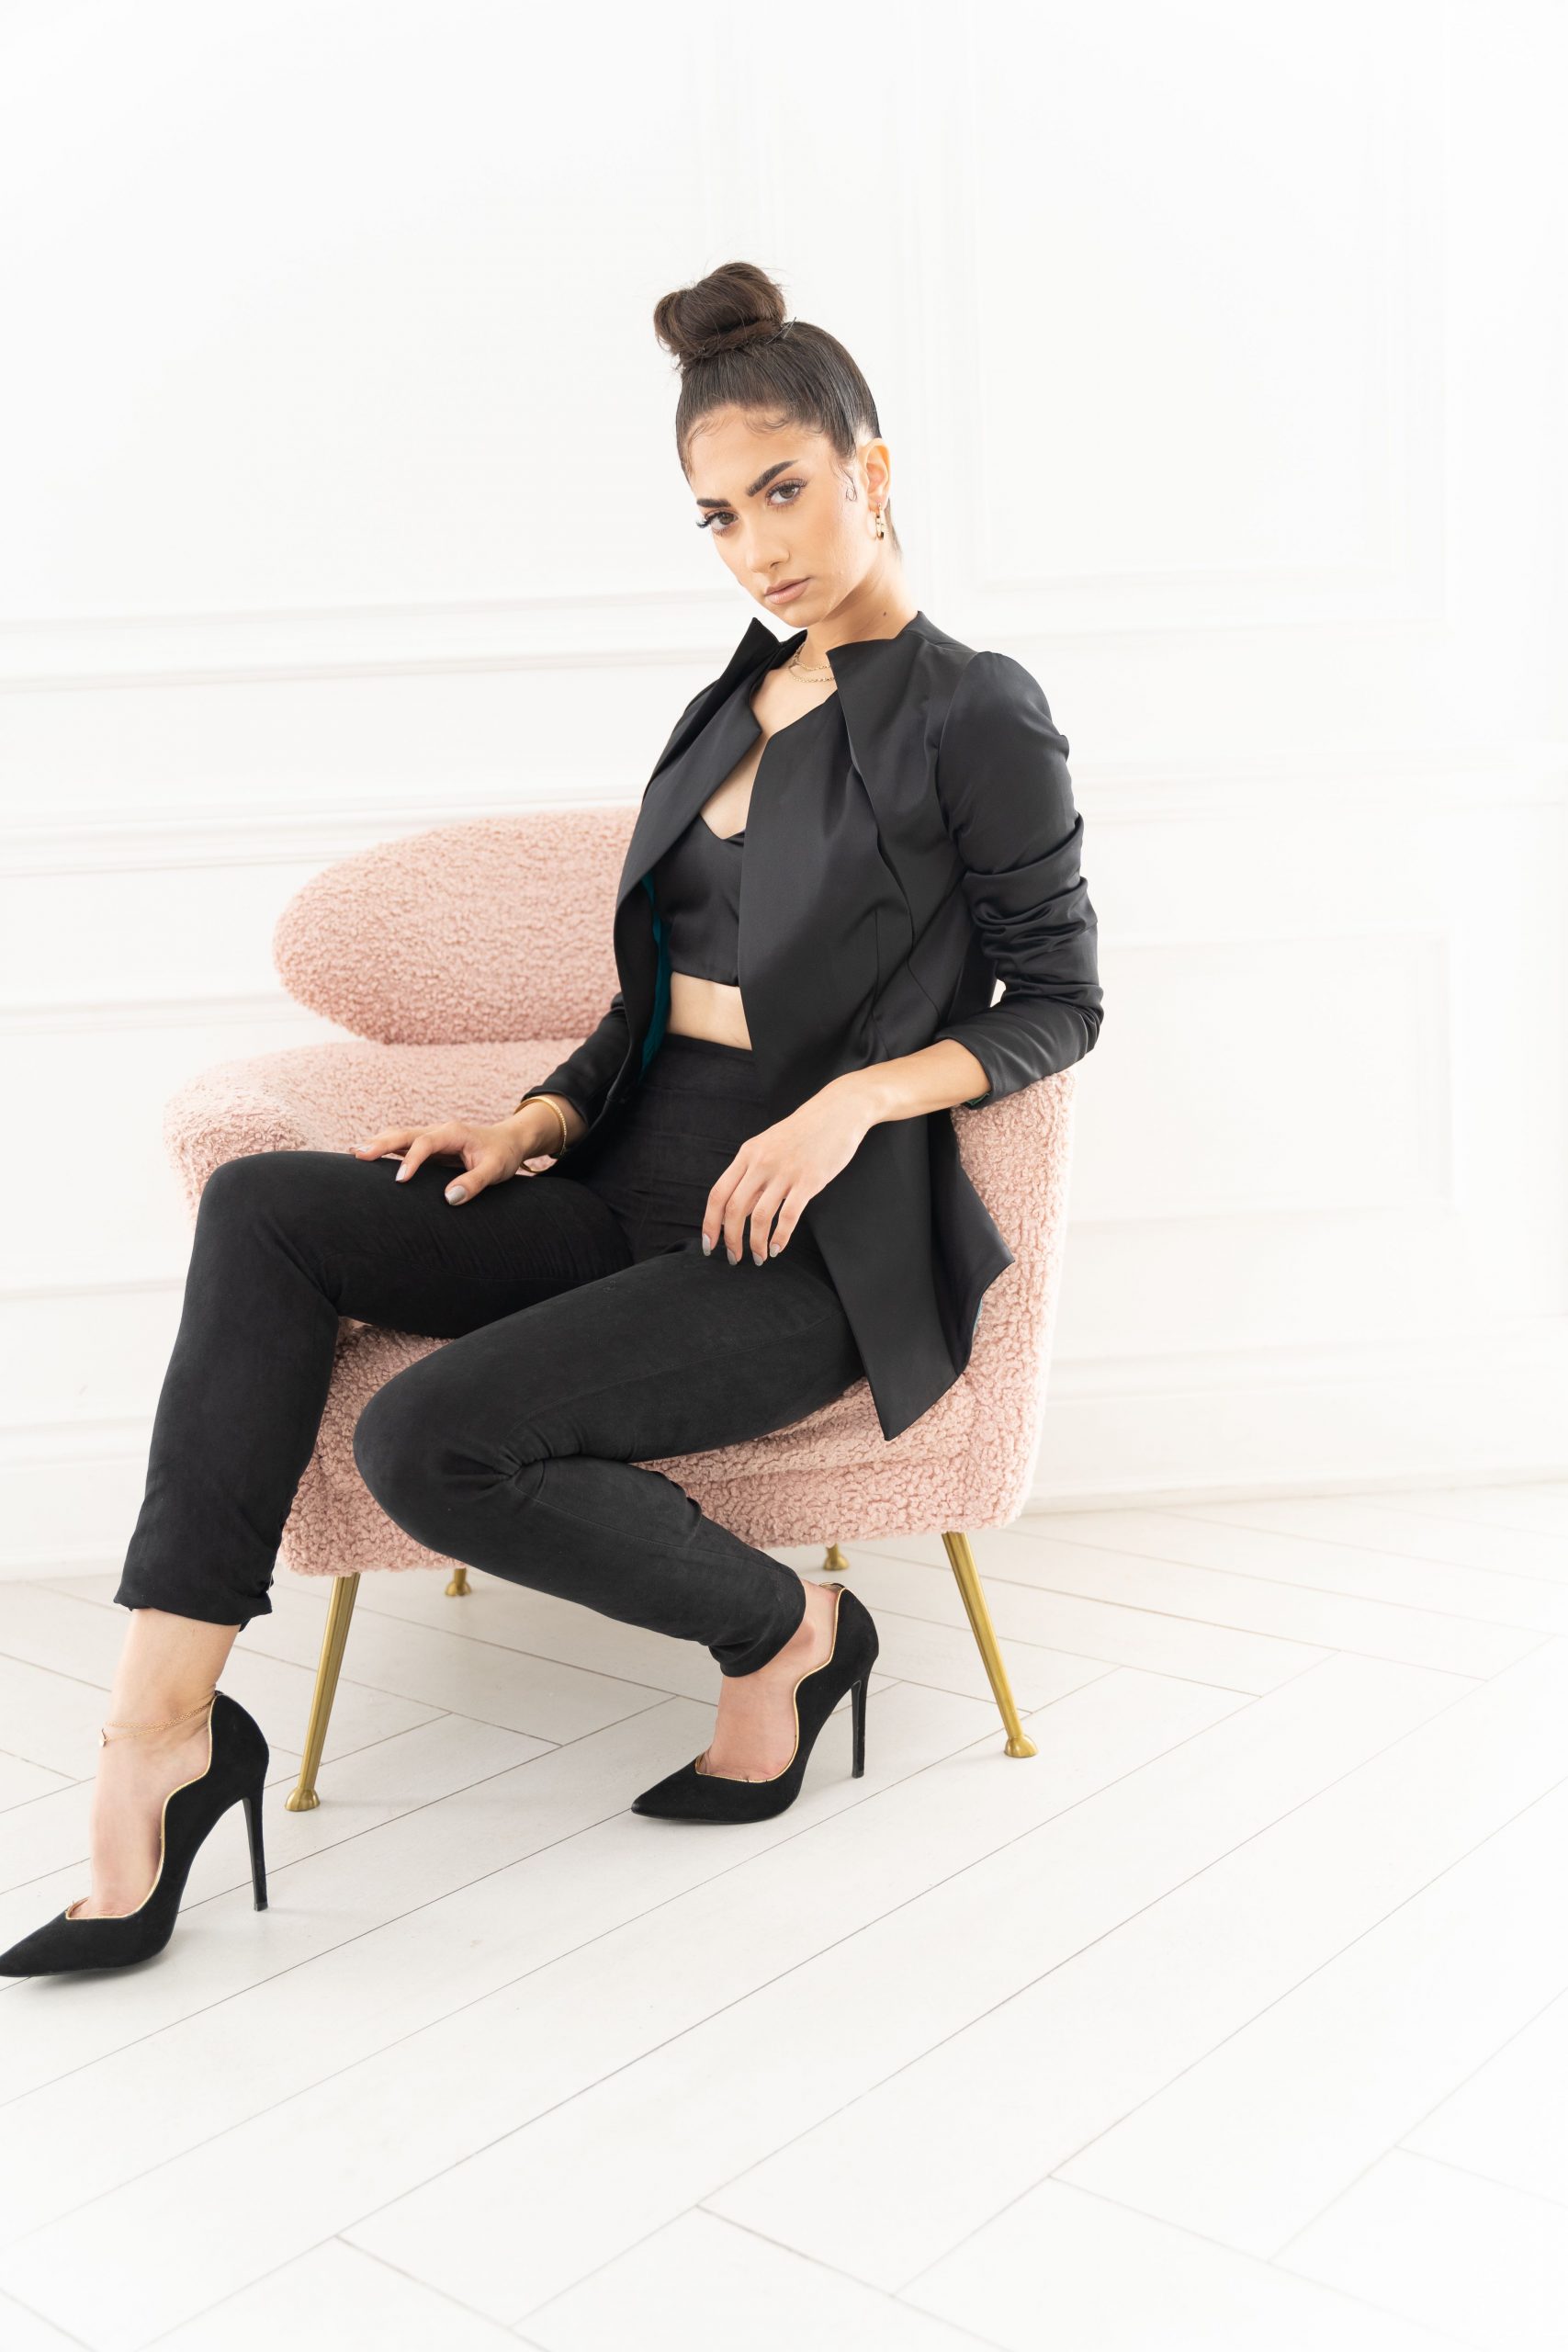 A woman in black outfit sitting on pink chair.